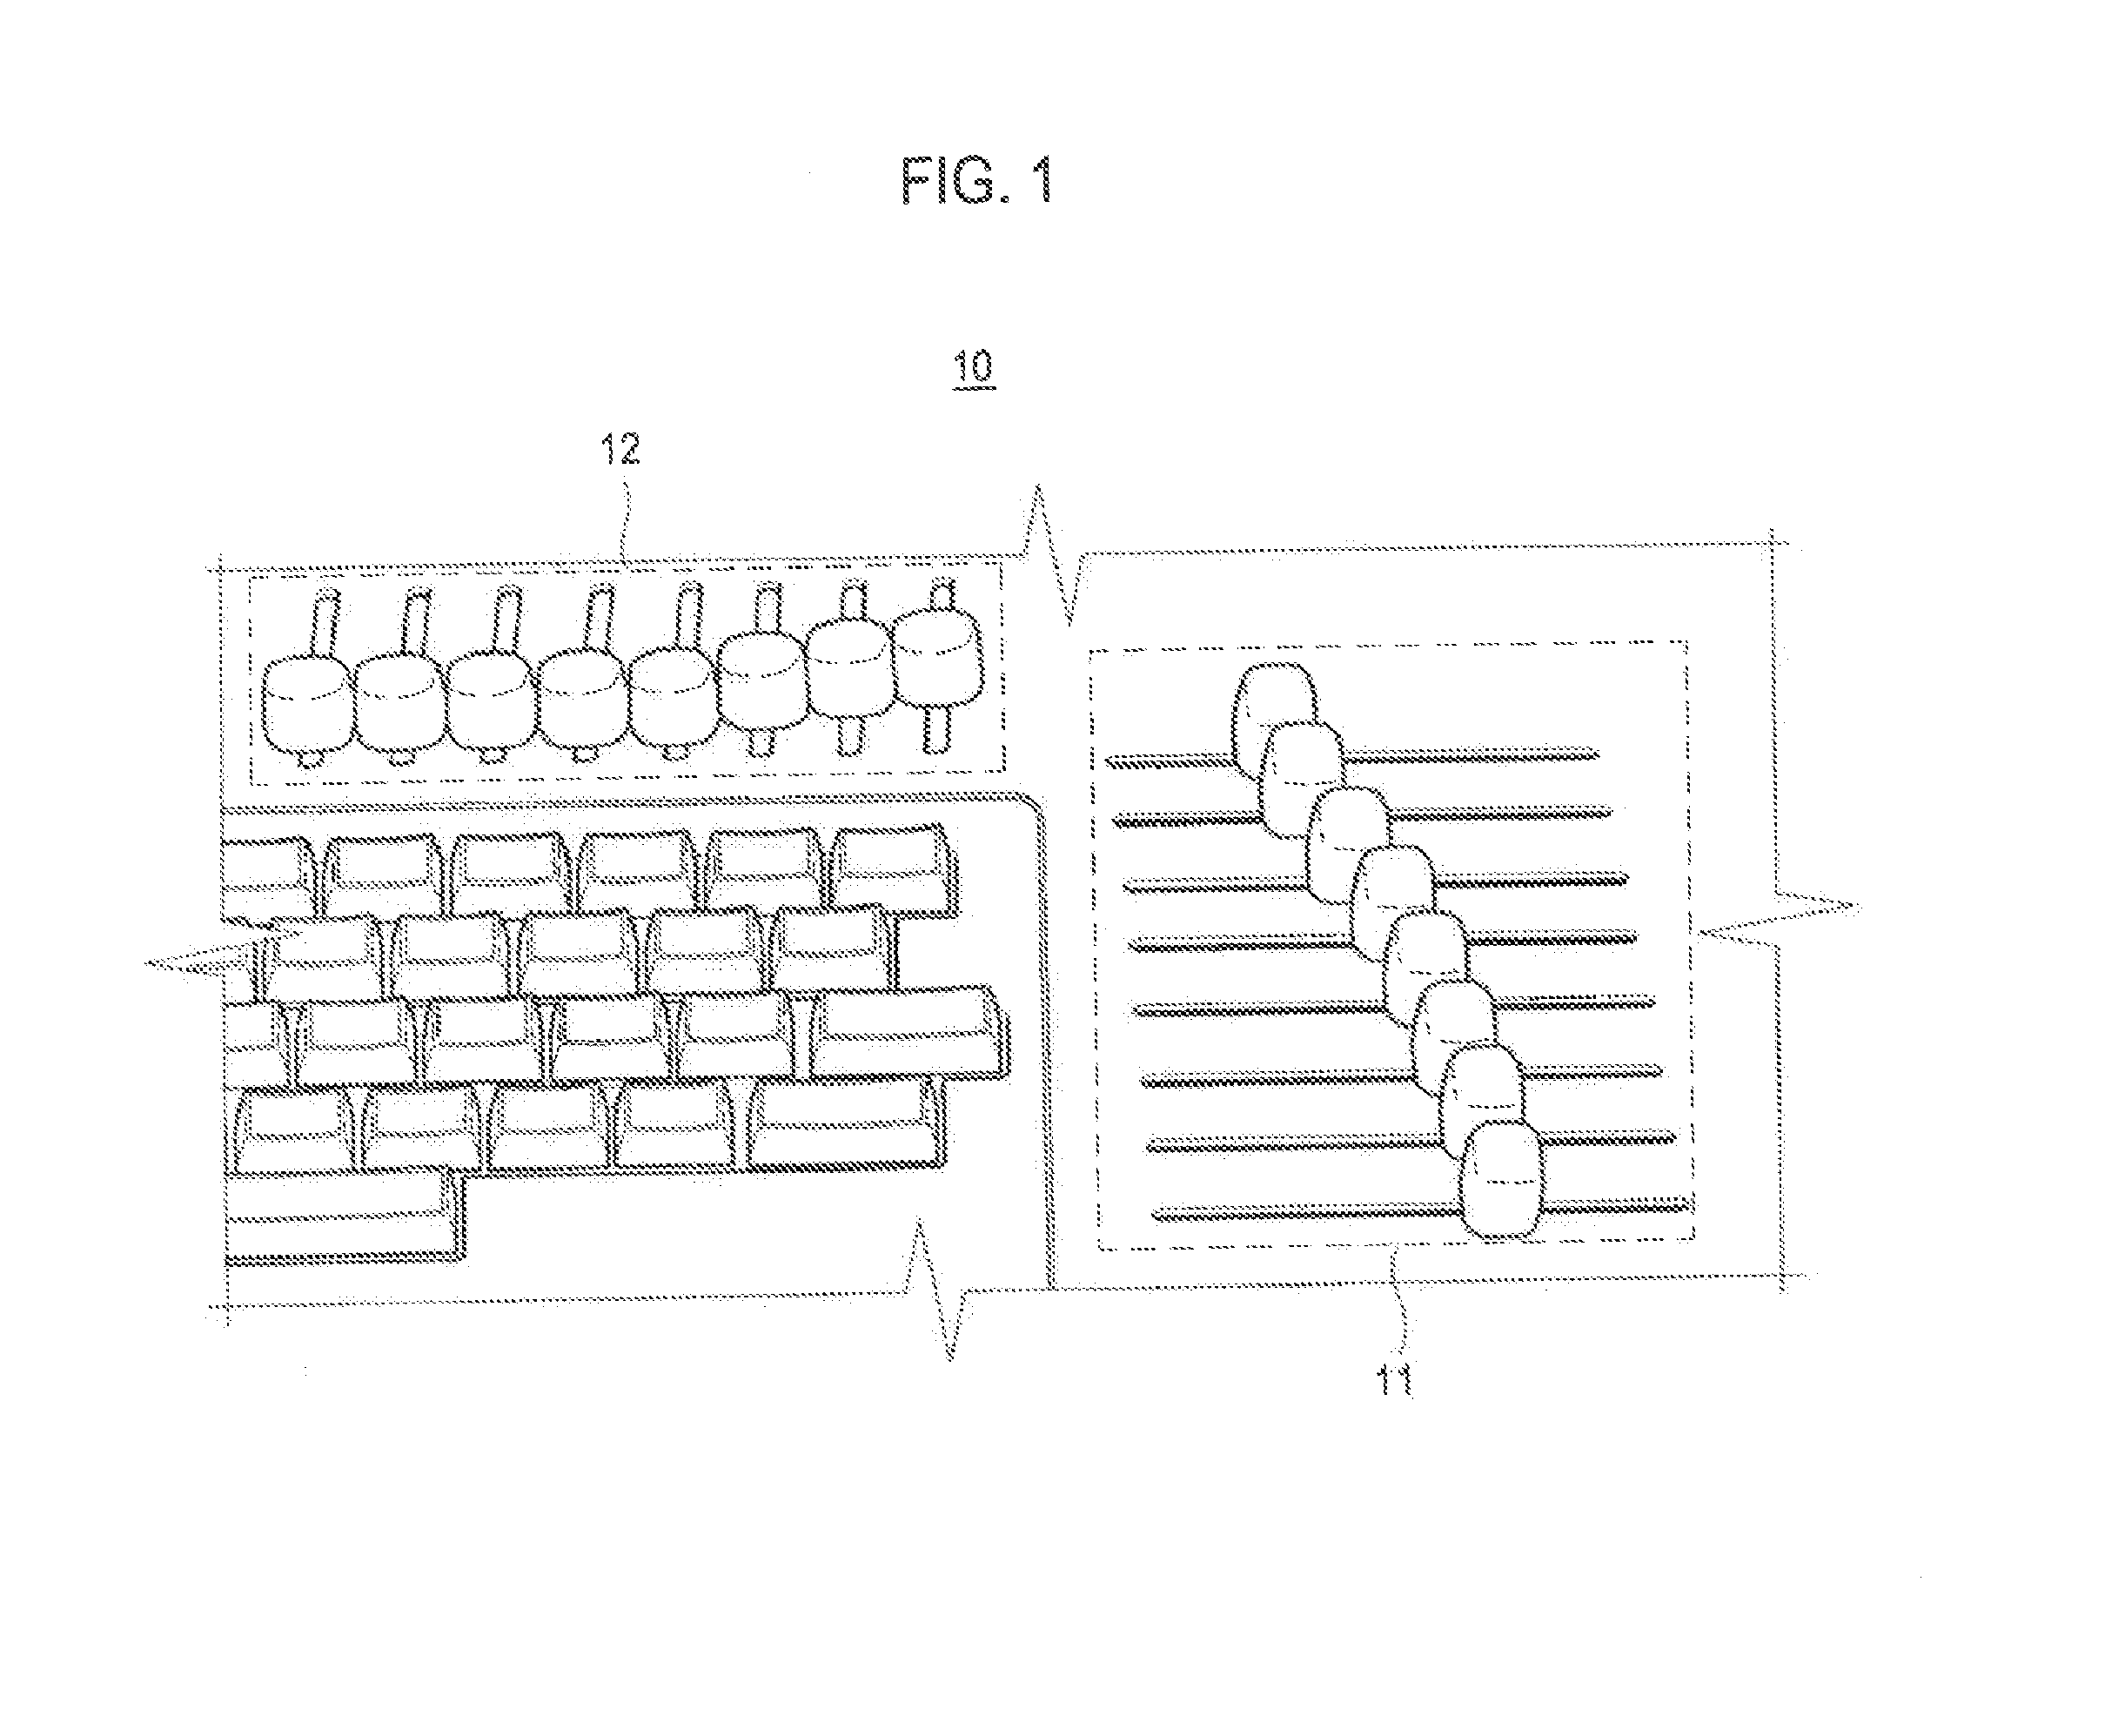 Ultrasound system and signal processing unit configured for time gain and lateral gain compensation